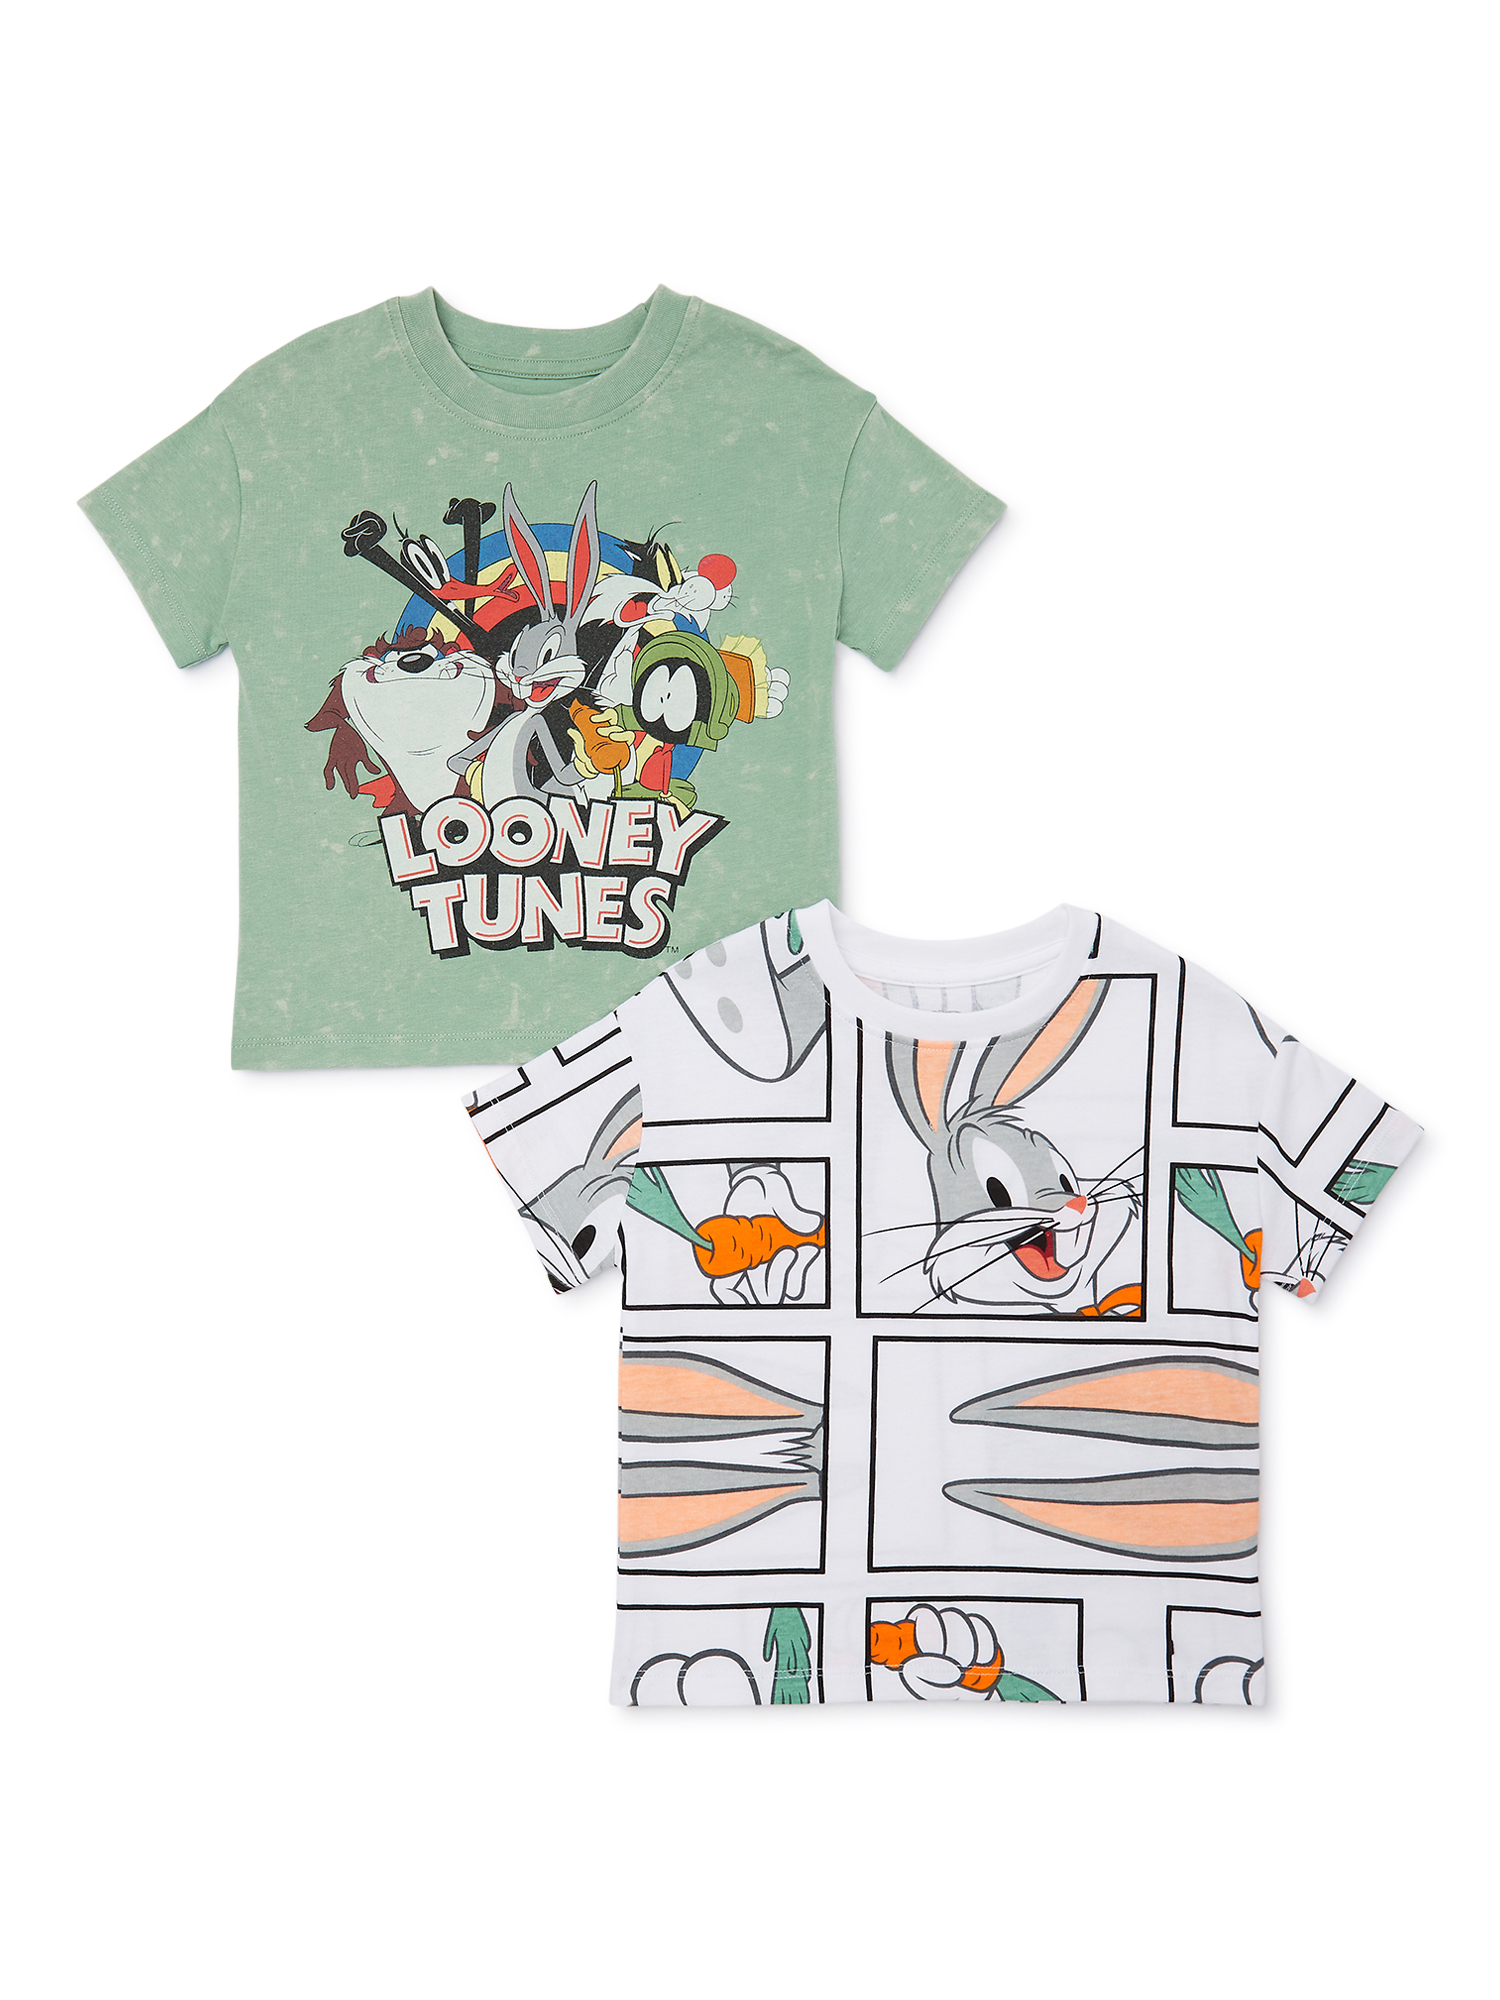 Looney Tunes Toddler Boy Graphic Tees, 2-Pack, Sizes 2T-5T - image 1 of 8